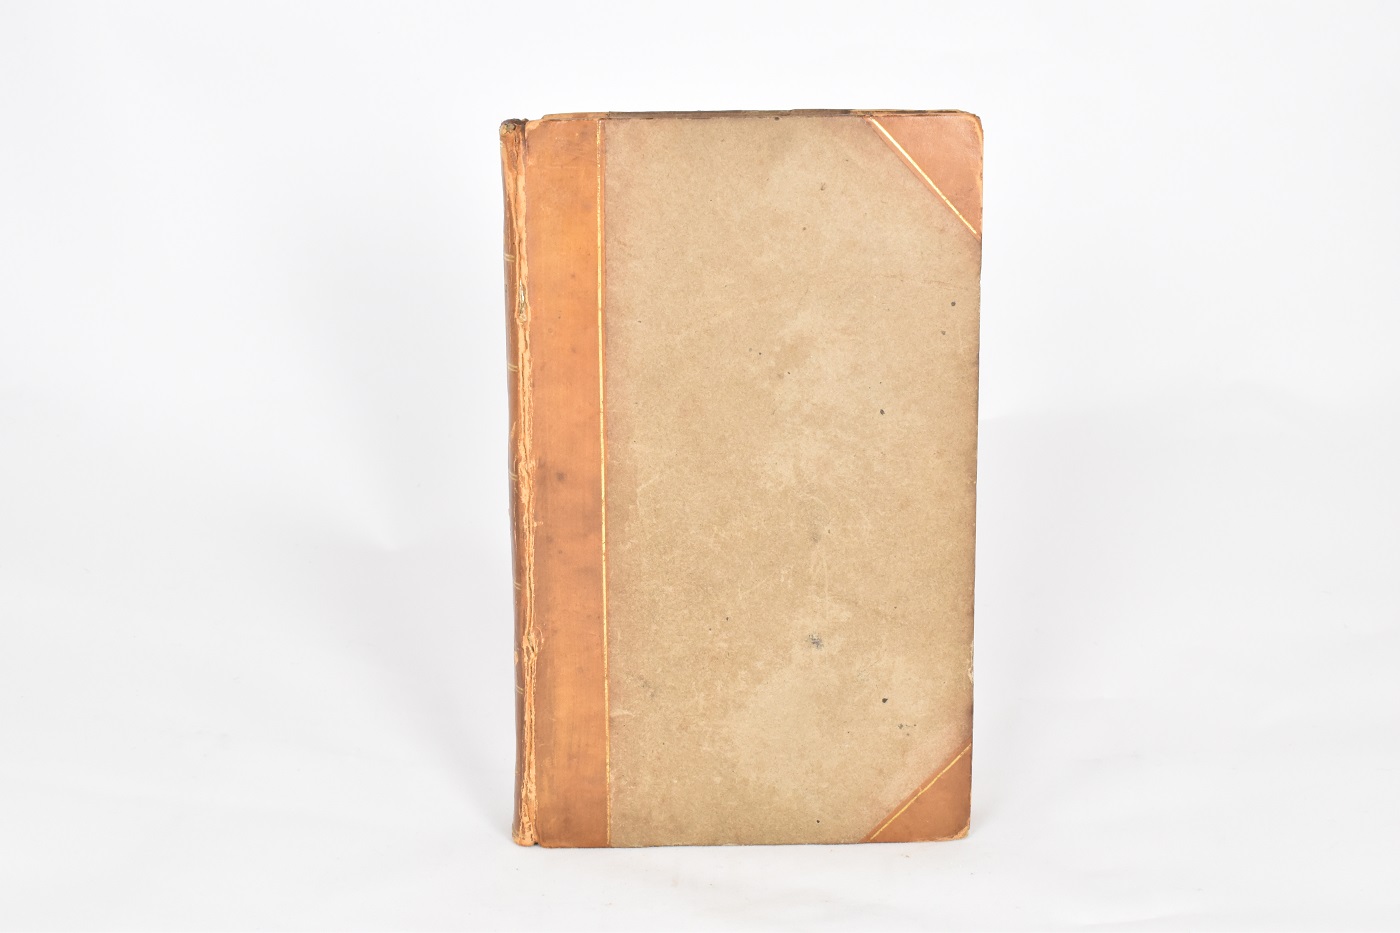 First edition of Mansfield Park published in May 1814. The front cover in plain drab boards.